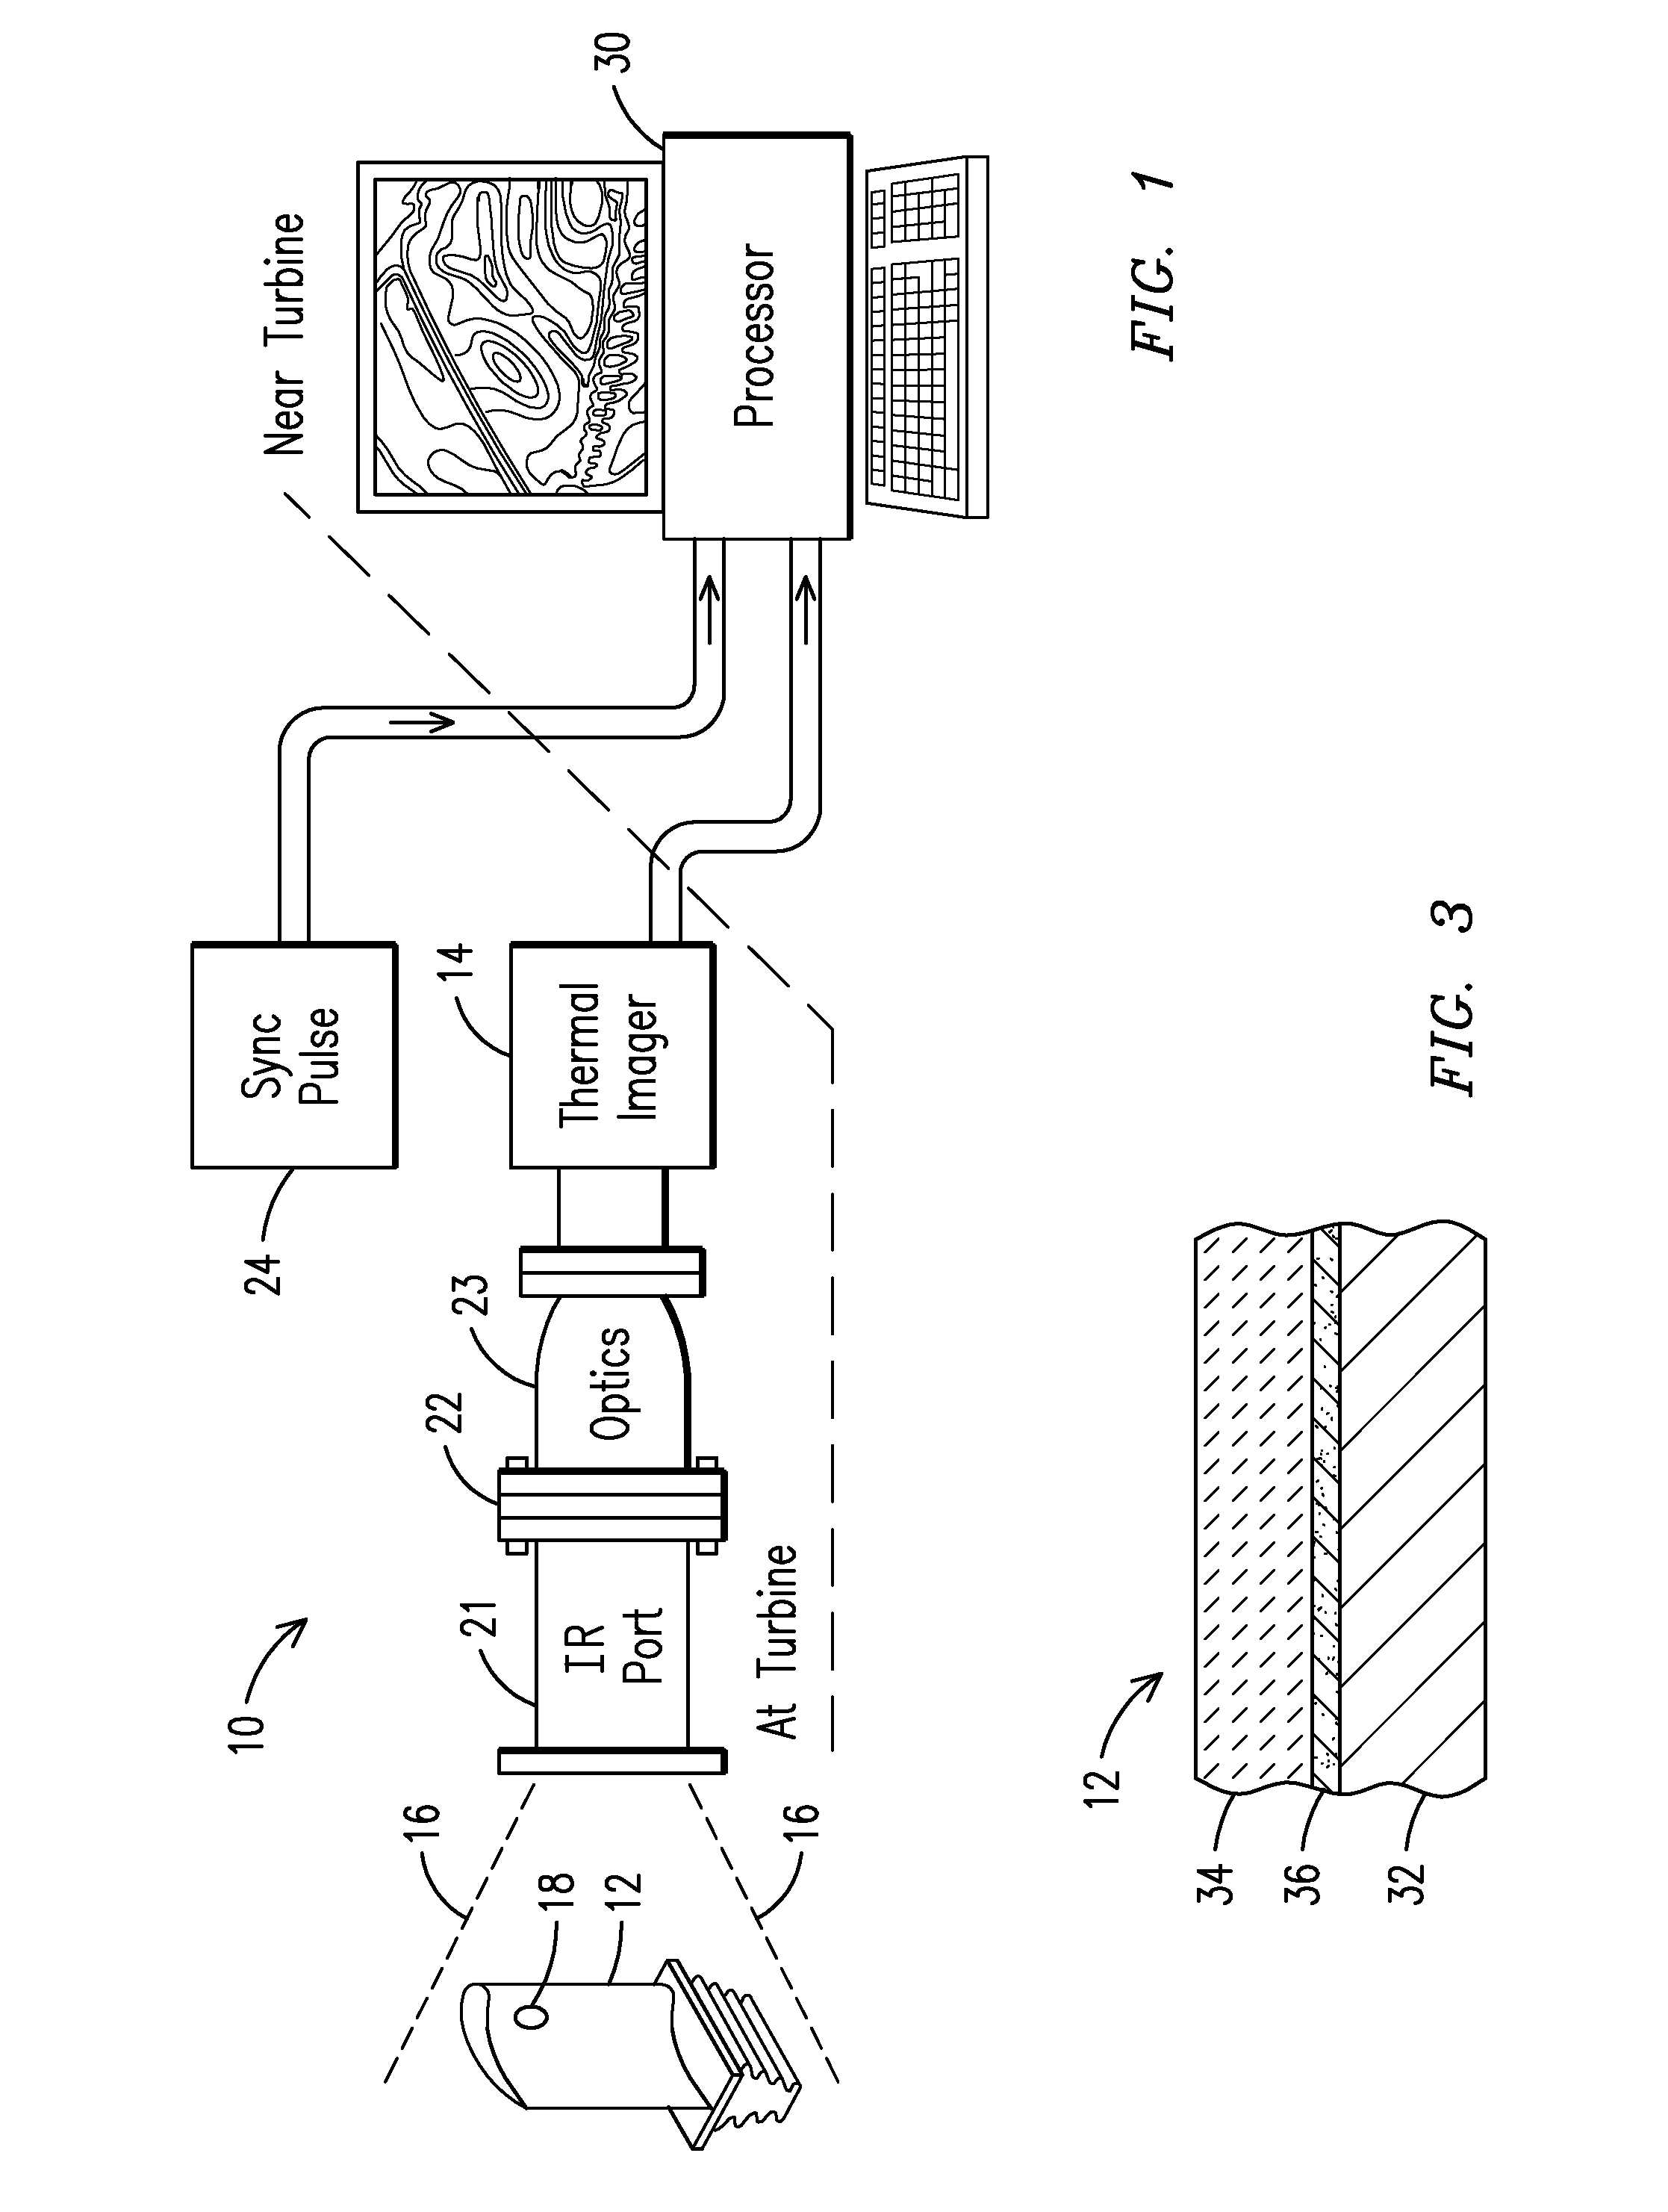 Apparatus and Method for Temperature Mapping a Rotating Turbine Component in a High Temperature Combustion Environment